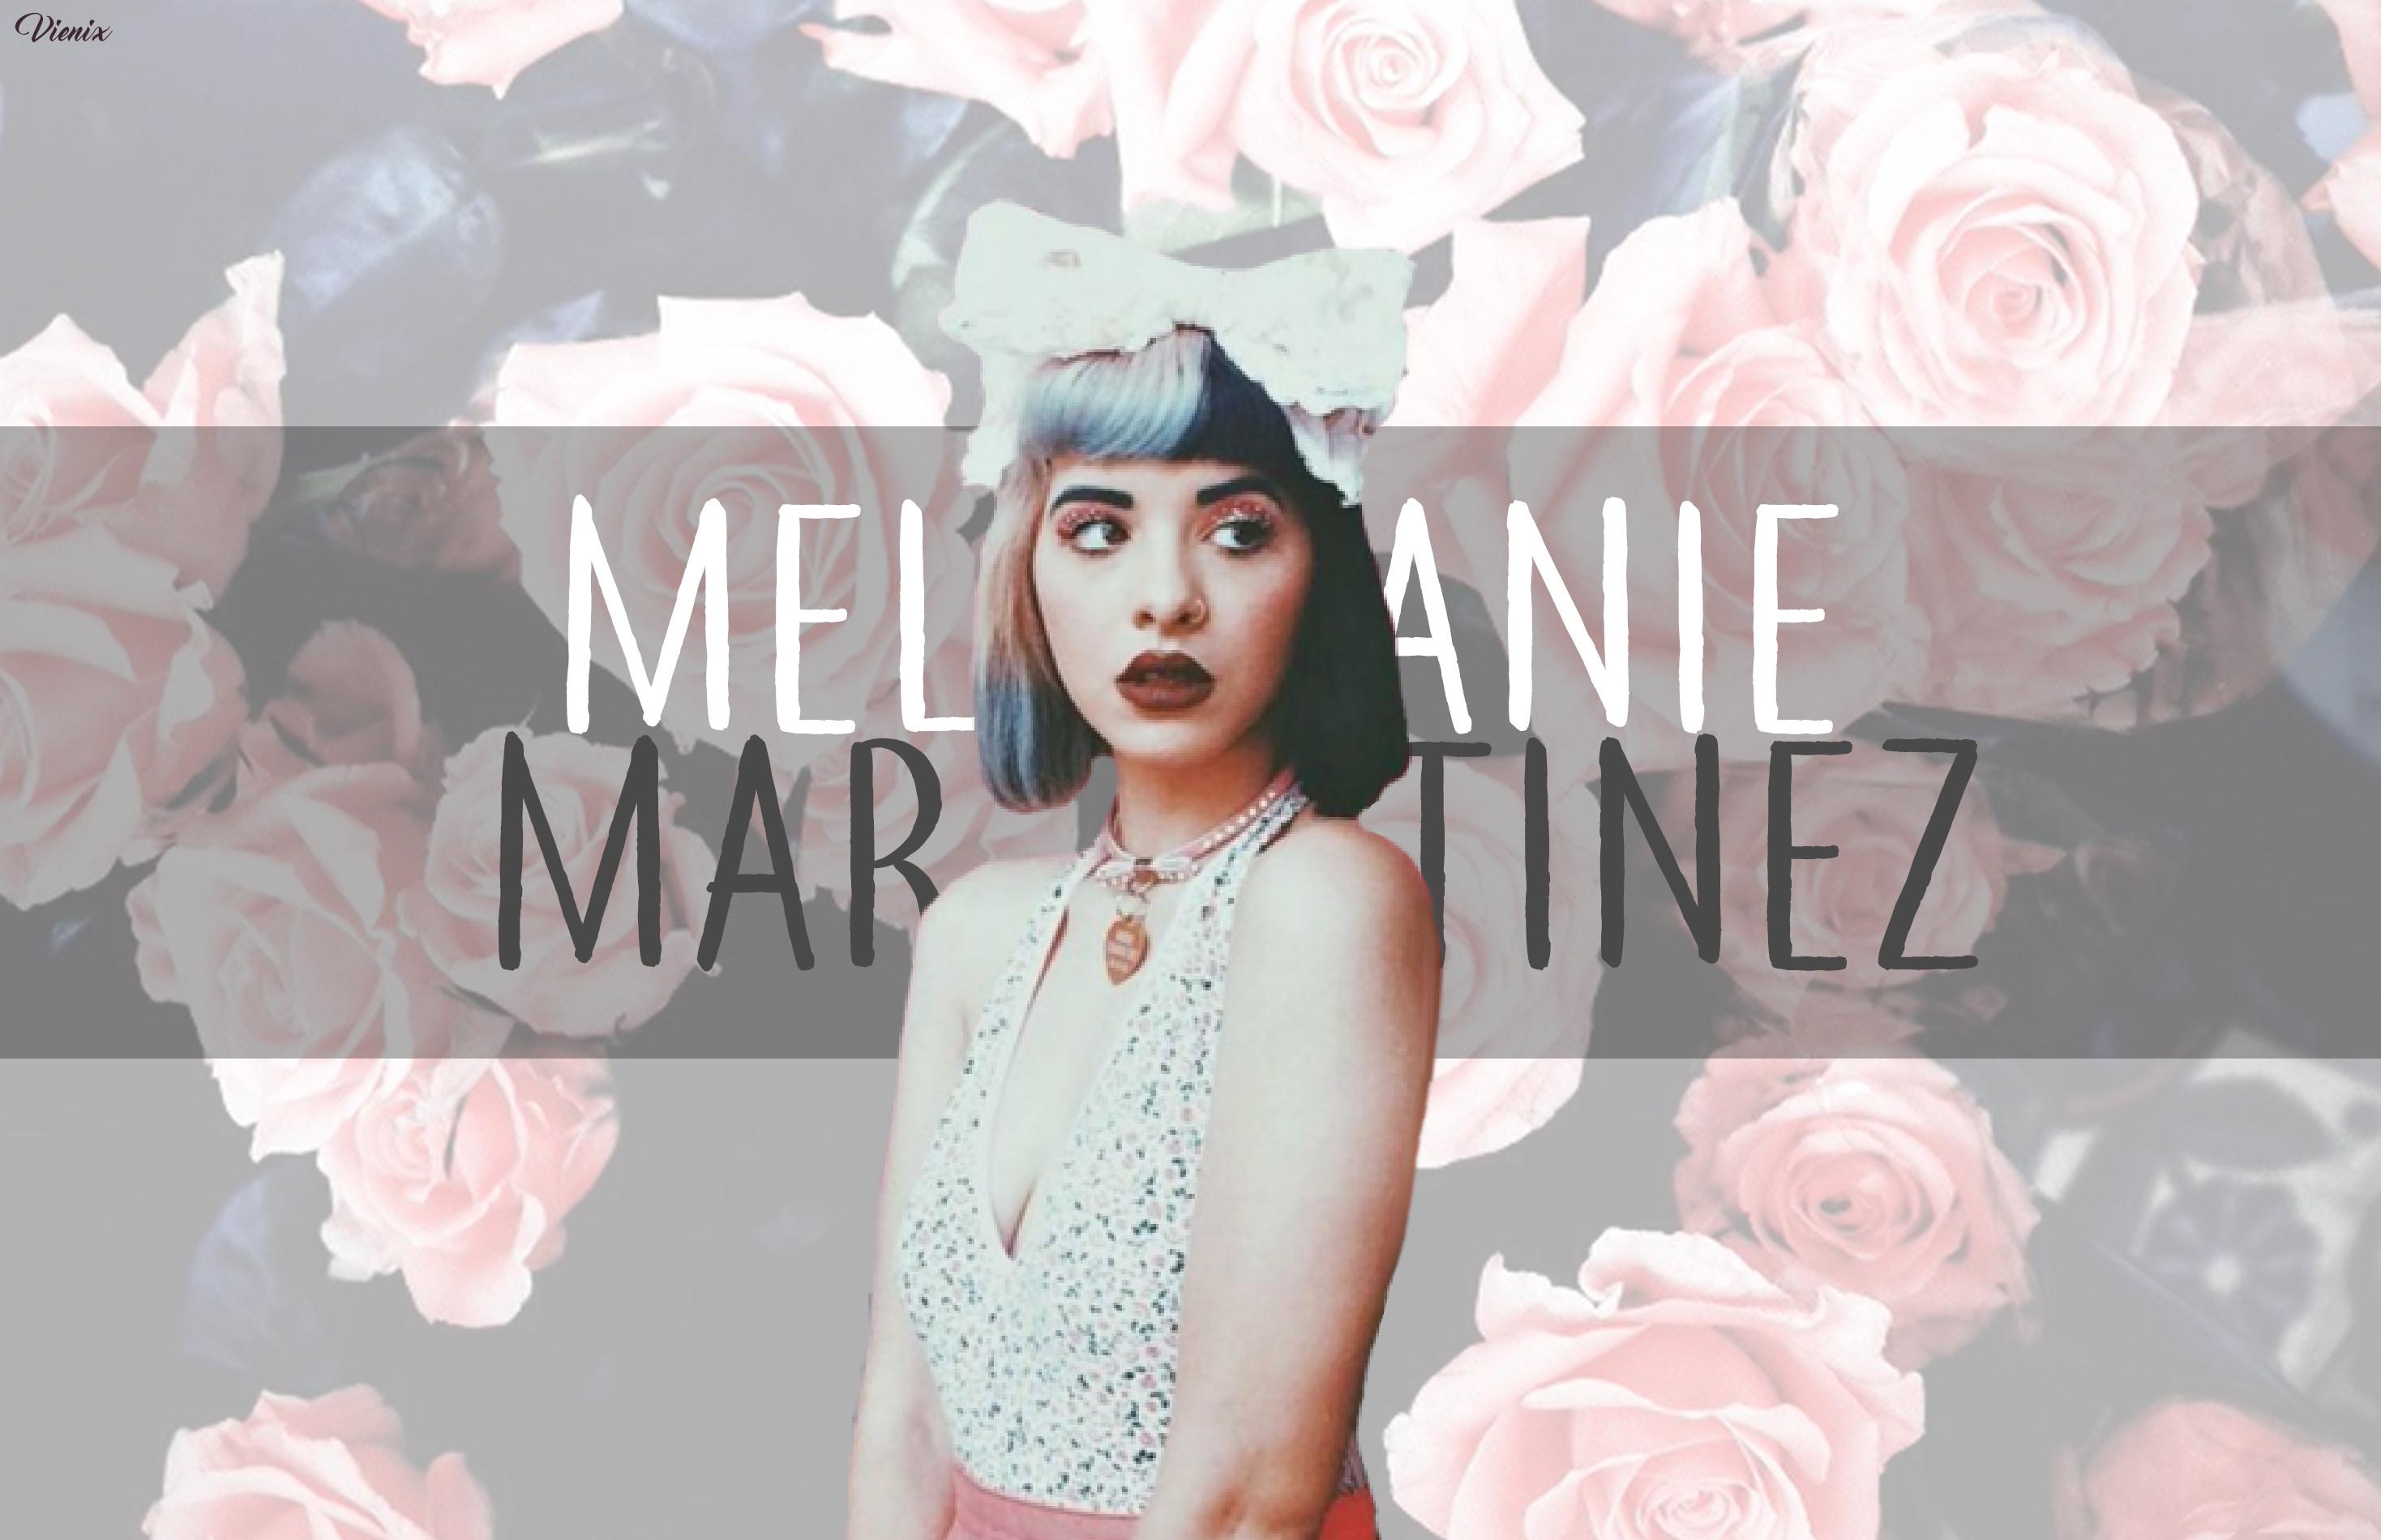 A woman with flowers in her hair - Melanie Martinez